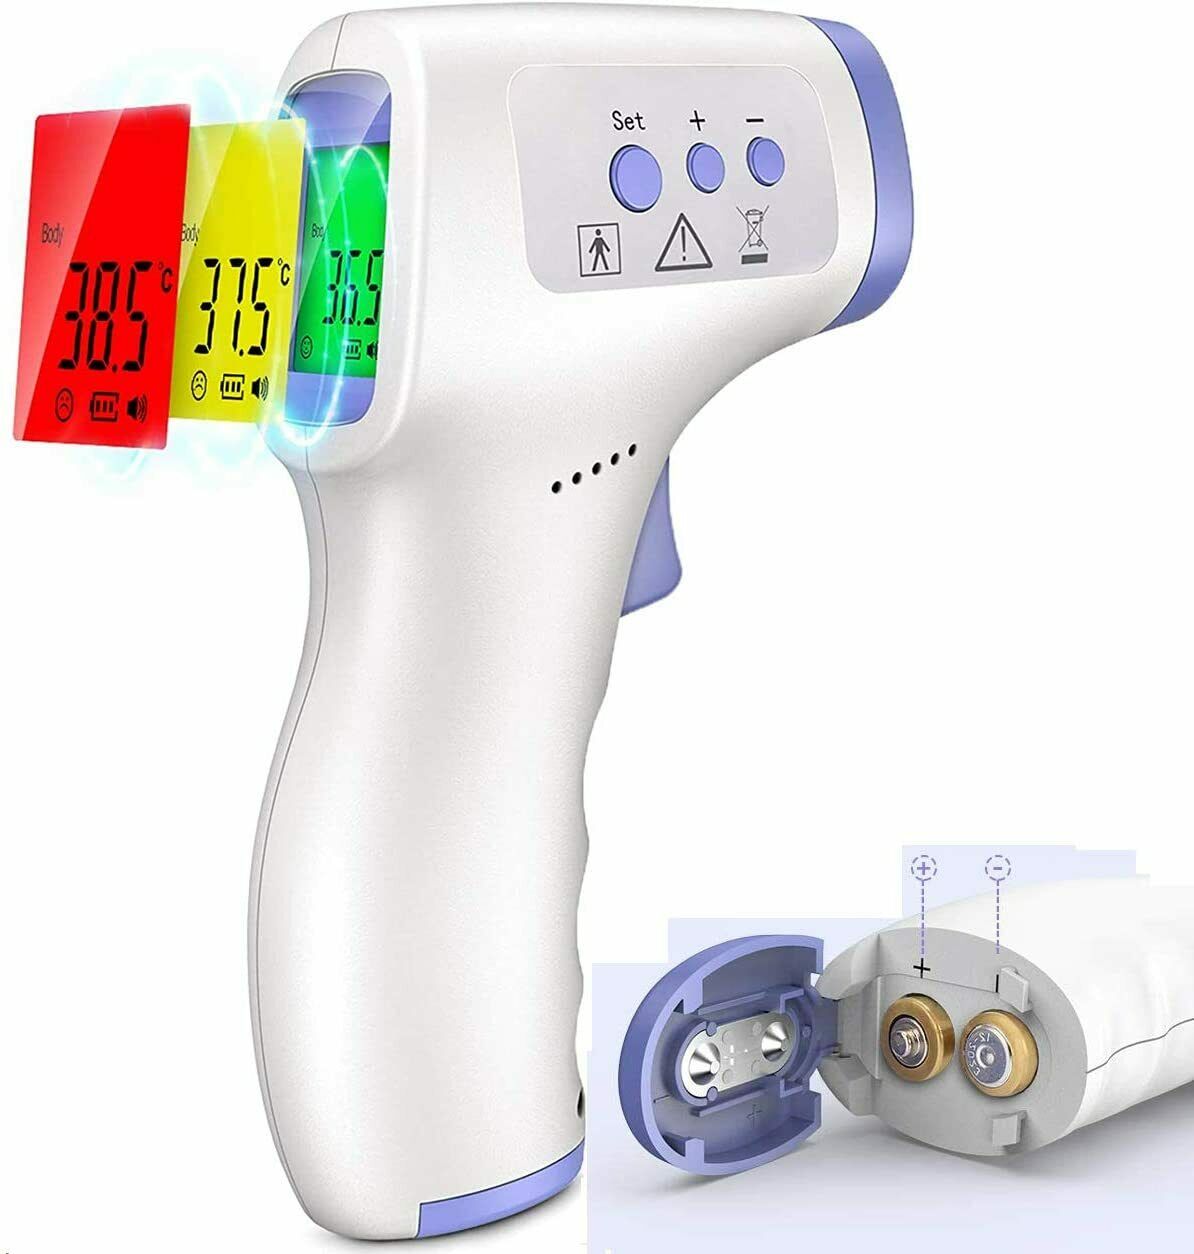 Infrared Forehead Thermometer Digital Lcd Non-contact Temperature Gun Us New